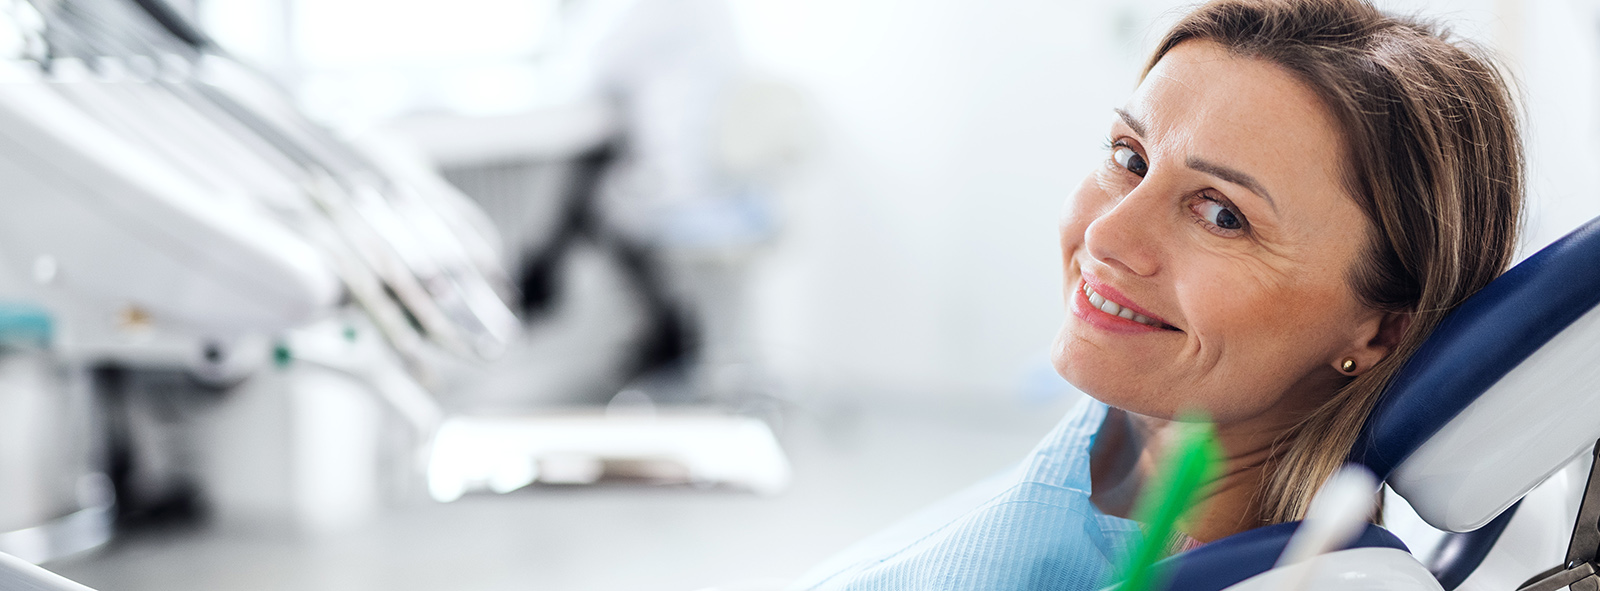 Periodontal Treatment in Simi Valley